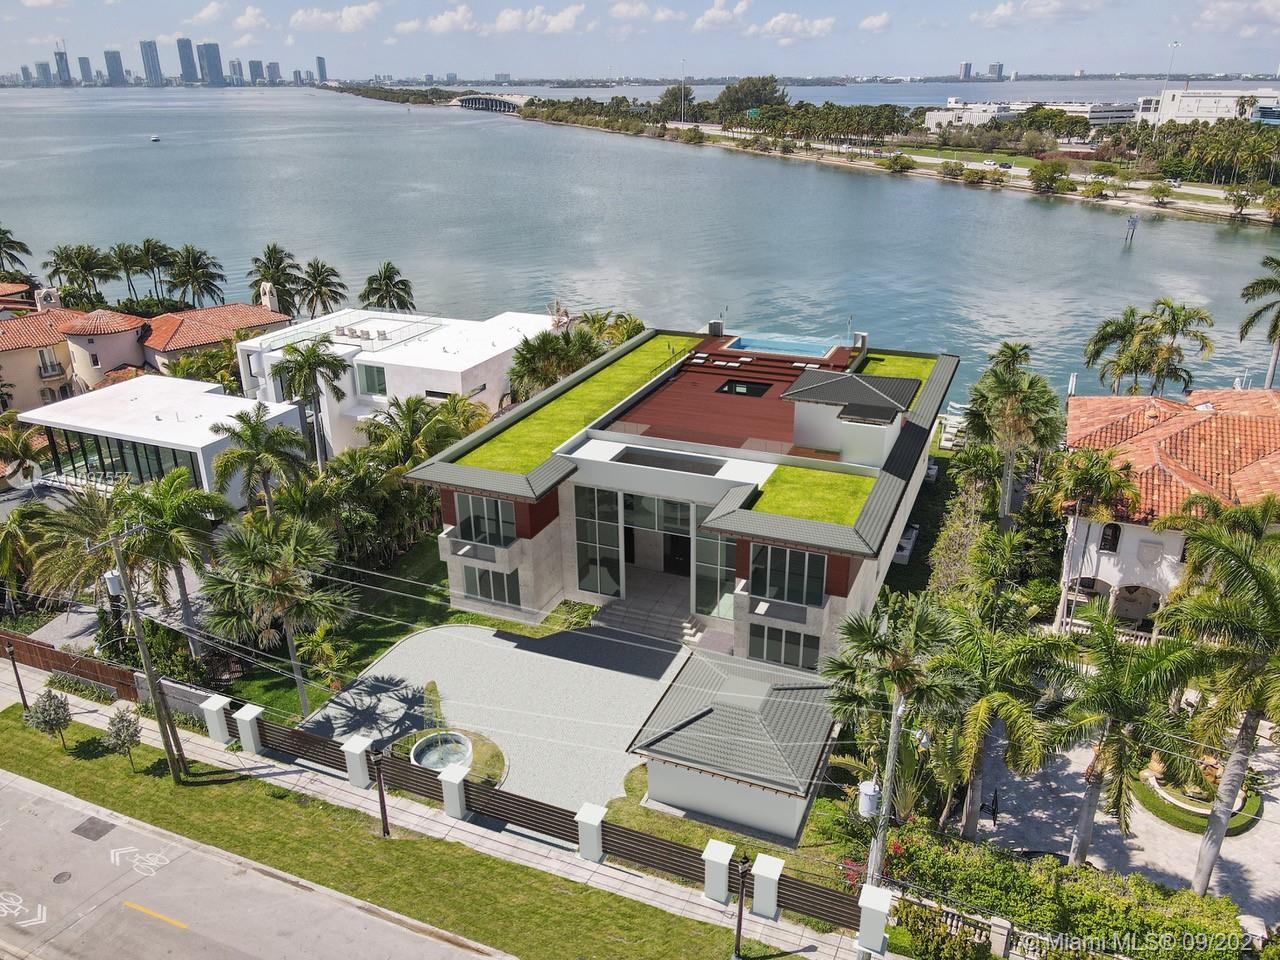 Rare opportunity to own your dream home on prestigious North Bay Road.  Price reflects the lot, building permits, architectural plans and shell of the home. This extraordinary waterfront property offers a stunning panoramic view of downtown Miami. Enjoy unobstructed ocean access and 100 feet of water frontage while boasting an expansive 11,649 of luxurious living space designed by award winning architect to uniquely capture the essence of all the elements.  Images displayed are only reflecting the visualization of the architectural plans (as per existing building permit).  Finishing touches can still be individually adapted to your desires. We are happy to discuss all details with you and project details are available upon request.  Prince is non-negotiable.